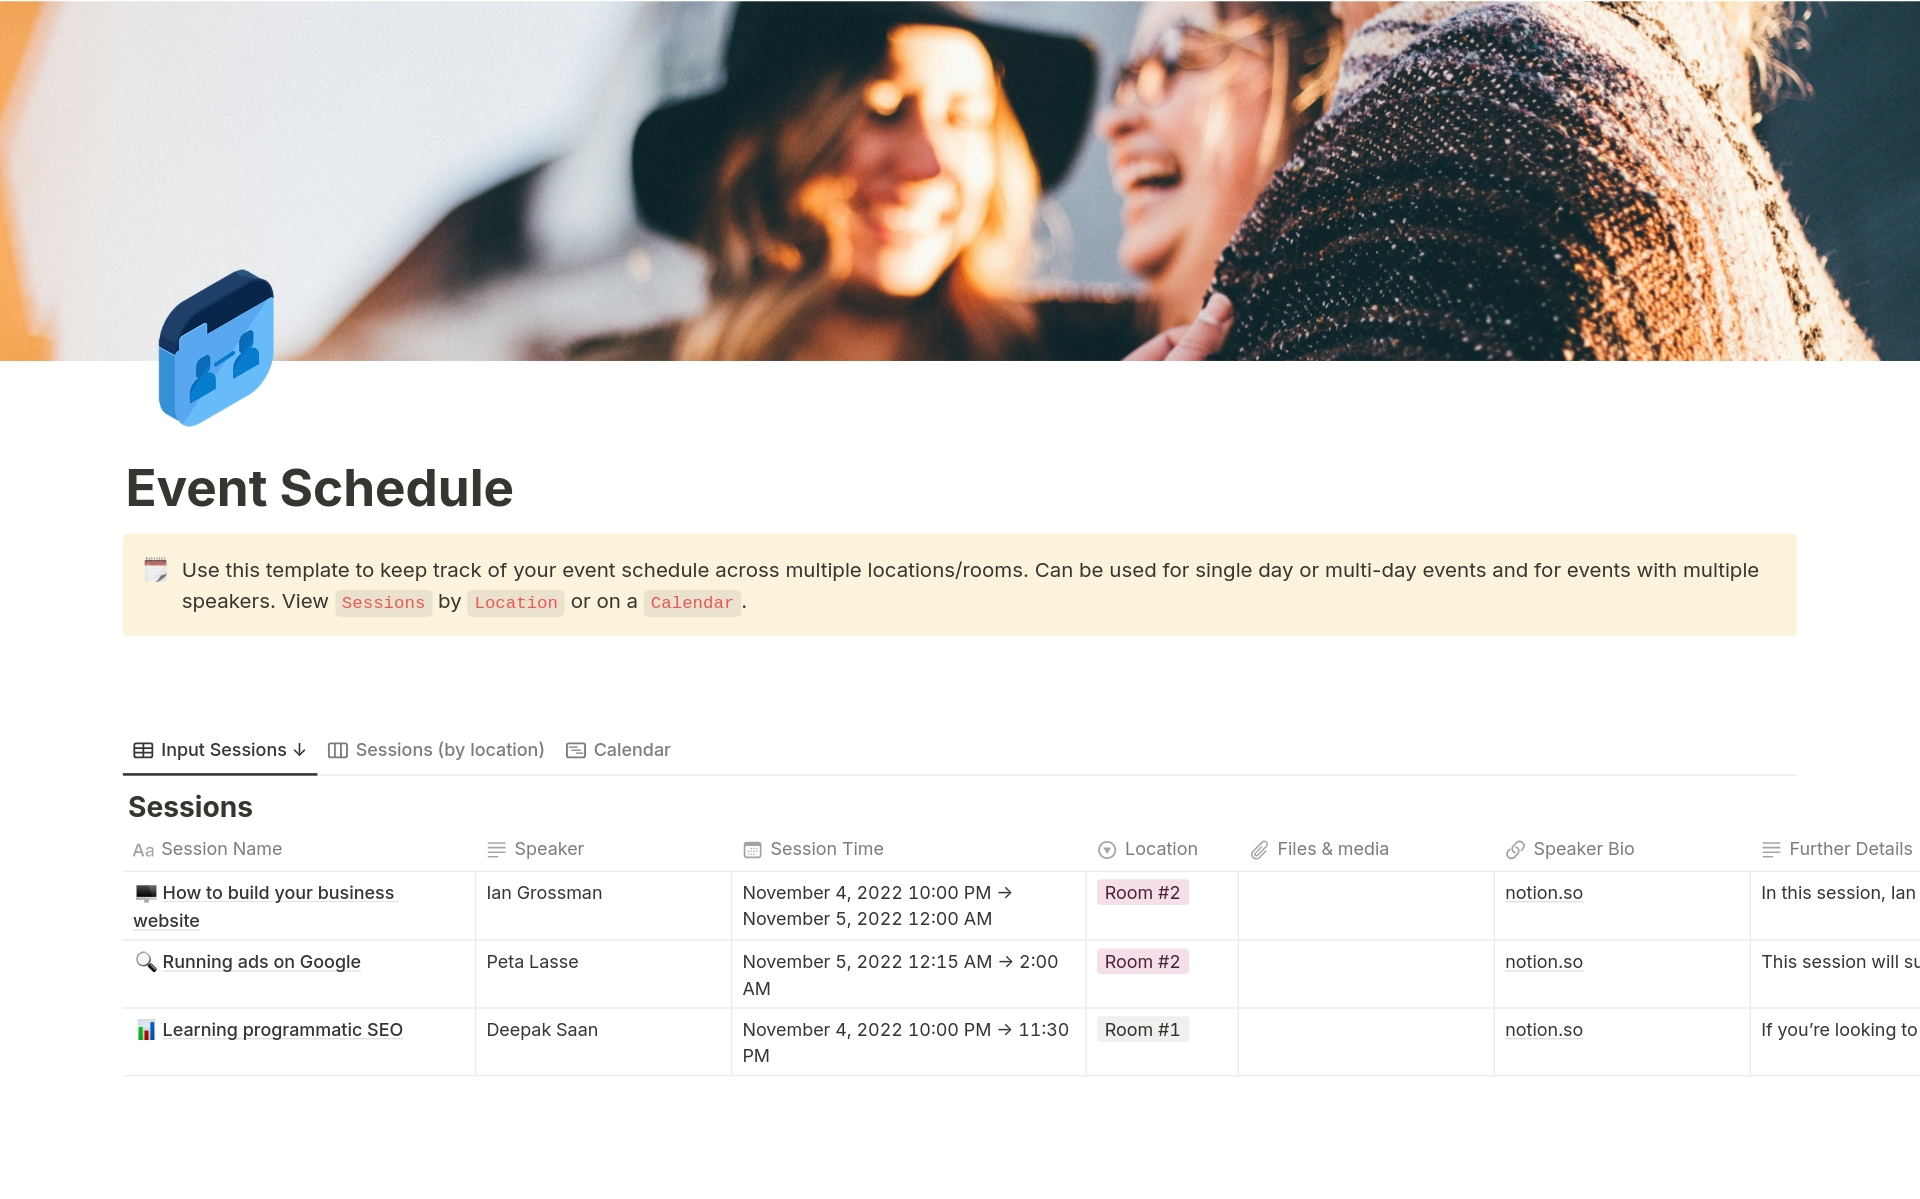 Use this template to keep track of your event schedule across multiple locations/rooms.